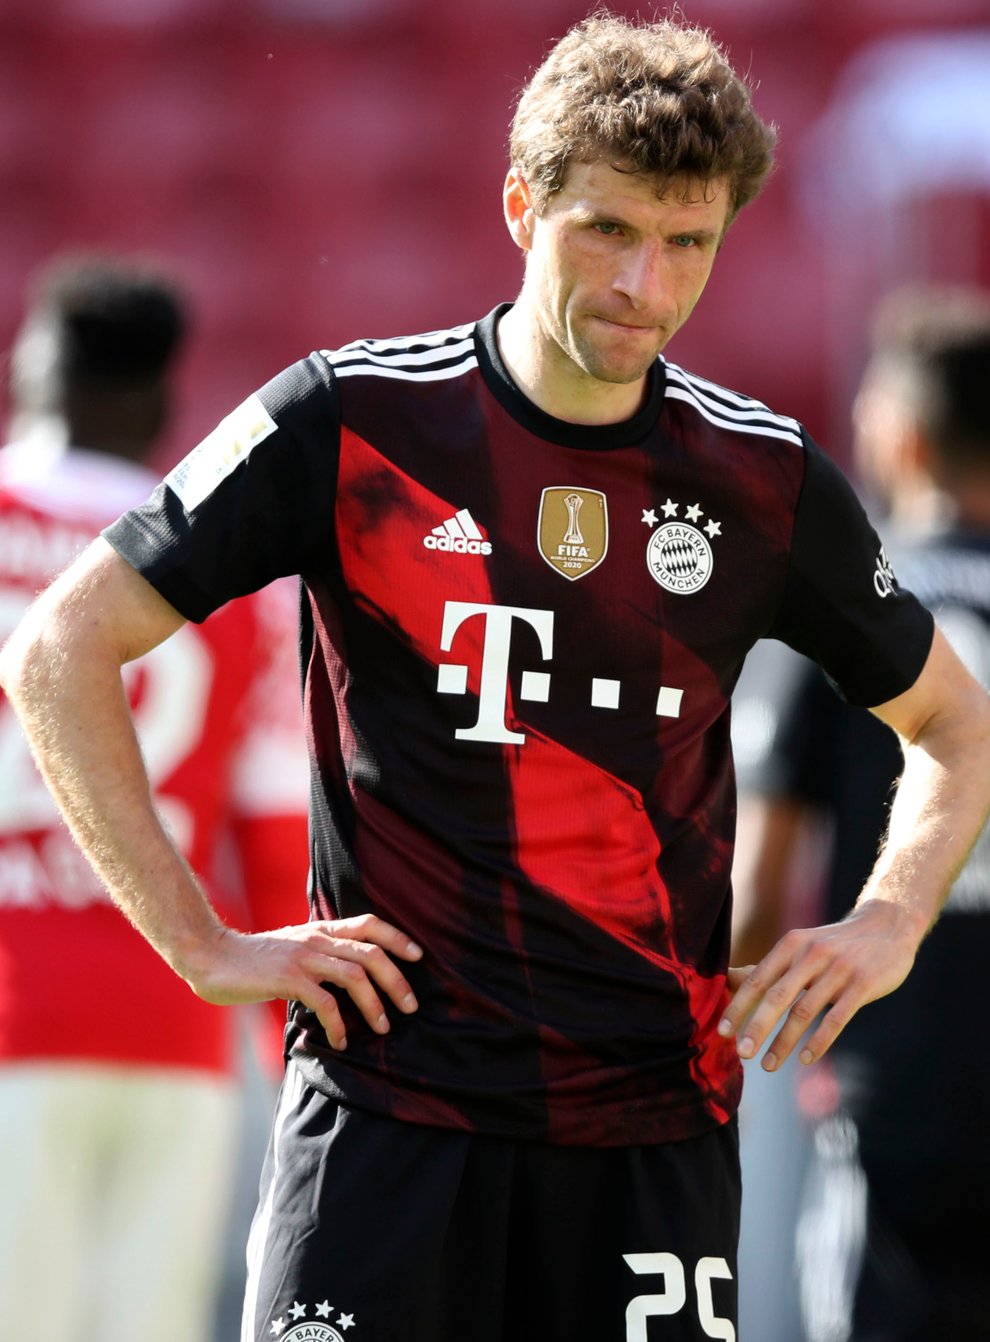 Bayern Munich’s Thomas Muller looks dejected during the shock 2-1 Bundesliga defeat to Mainz